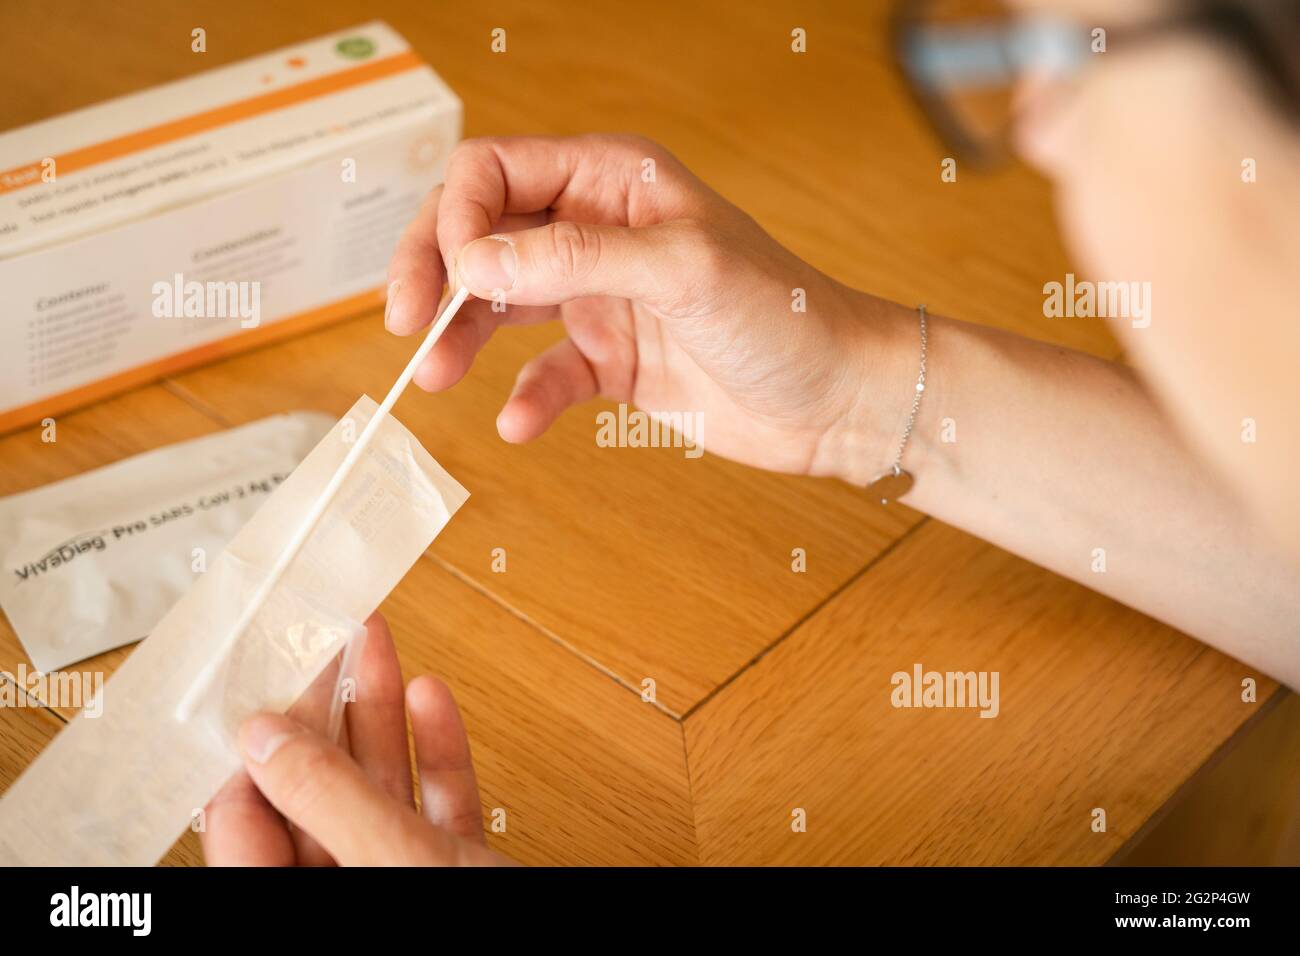 A woman pulling out a nasal swab for taking a self diagnostic VivaDiag SARS-CoV-2 Ag Rapid Test for Covid-19 at home Stock Photo